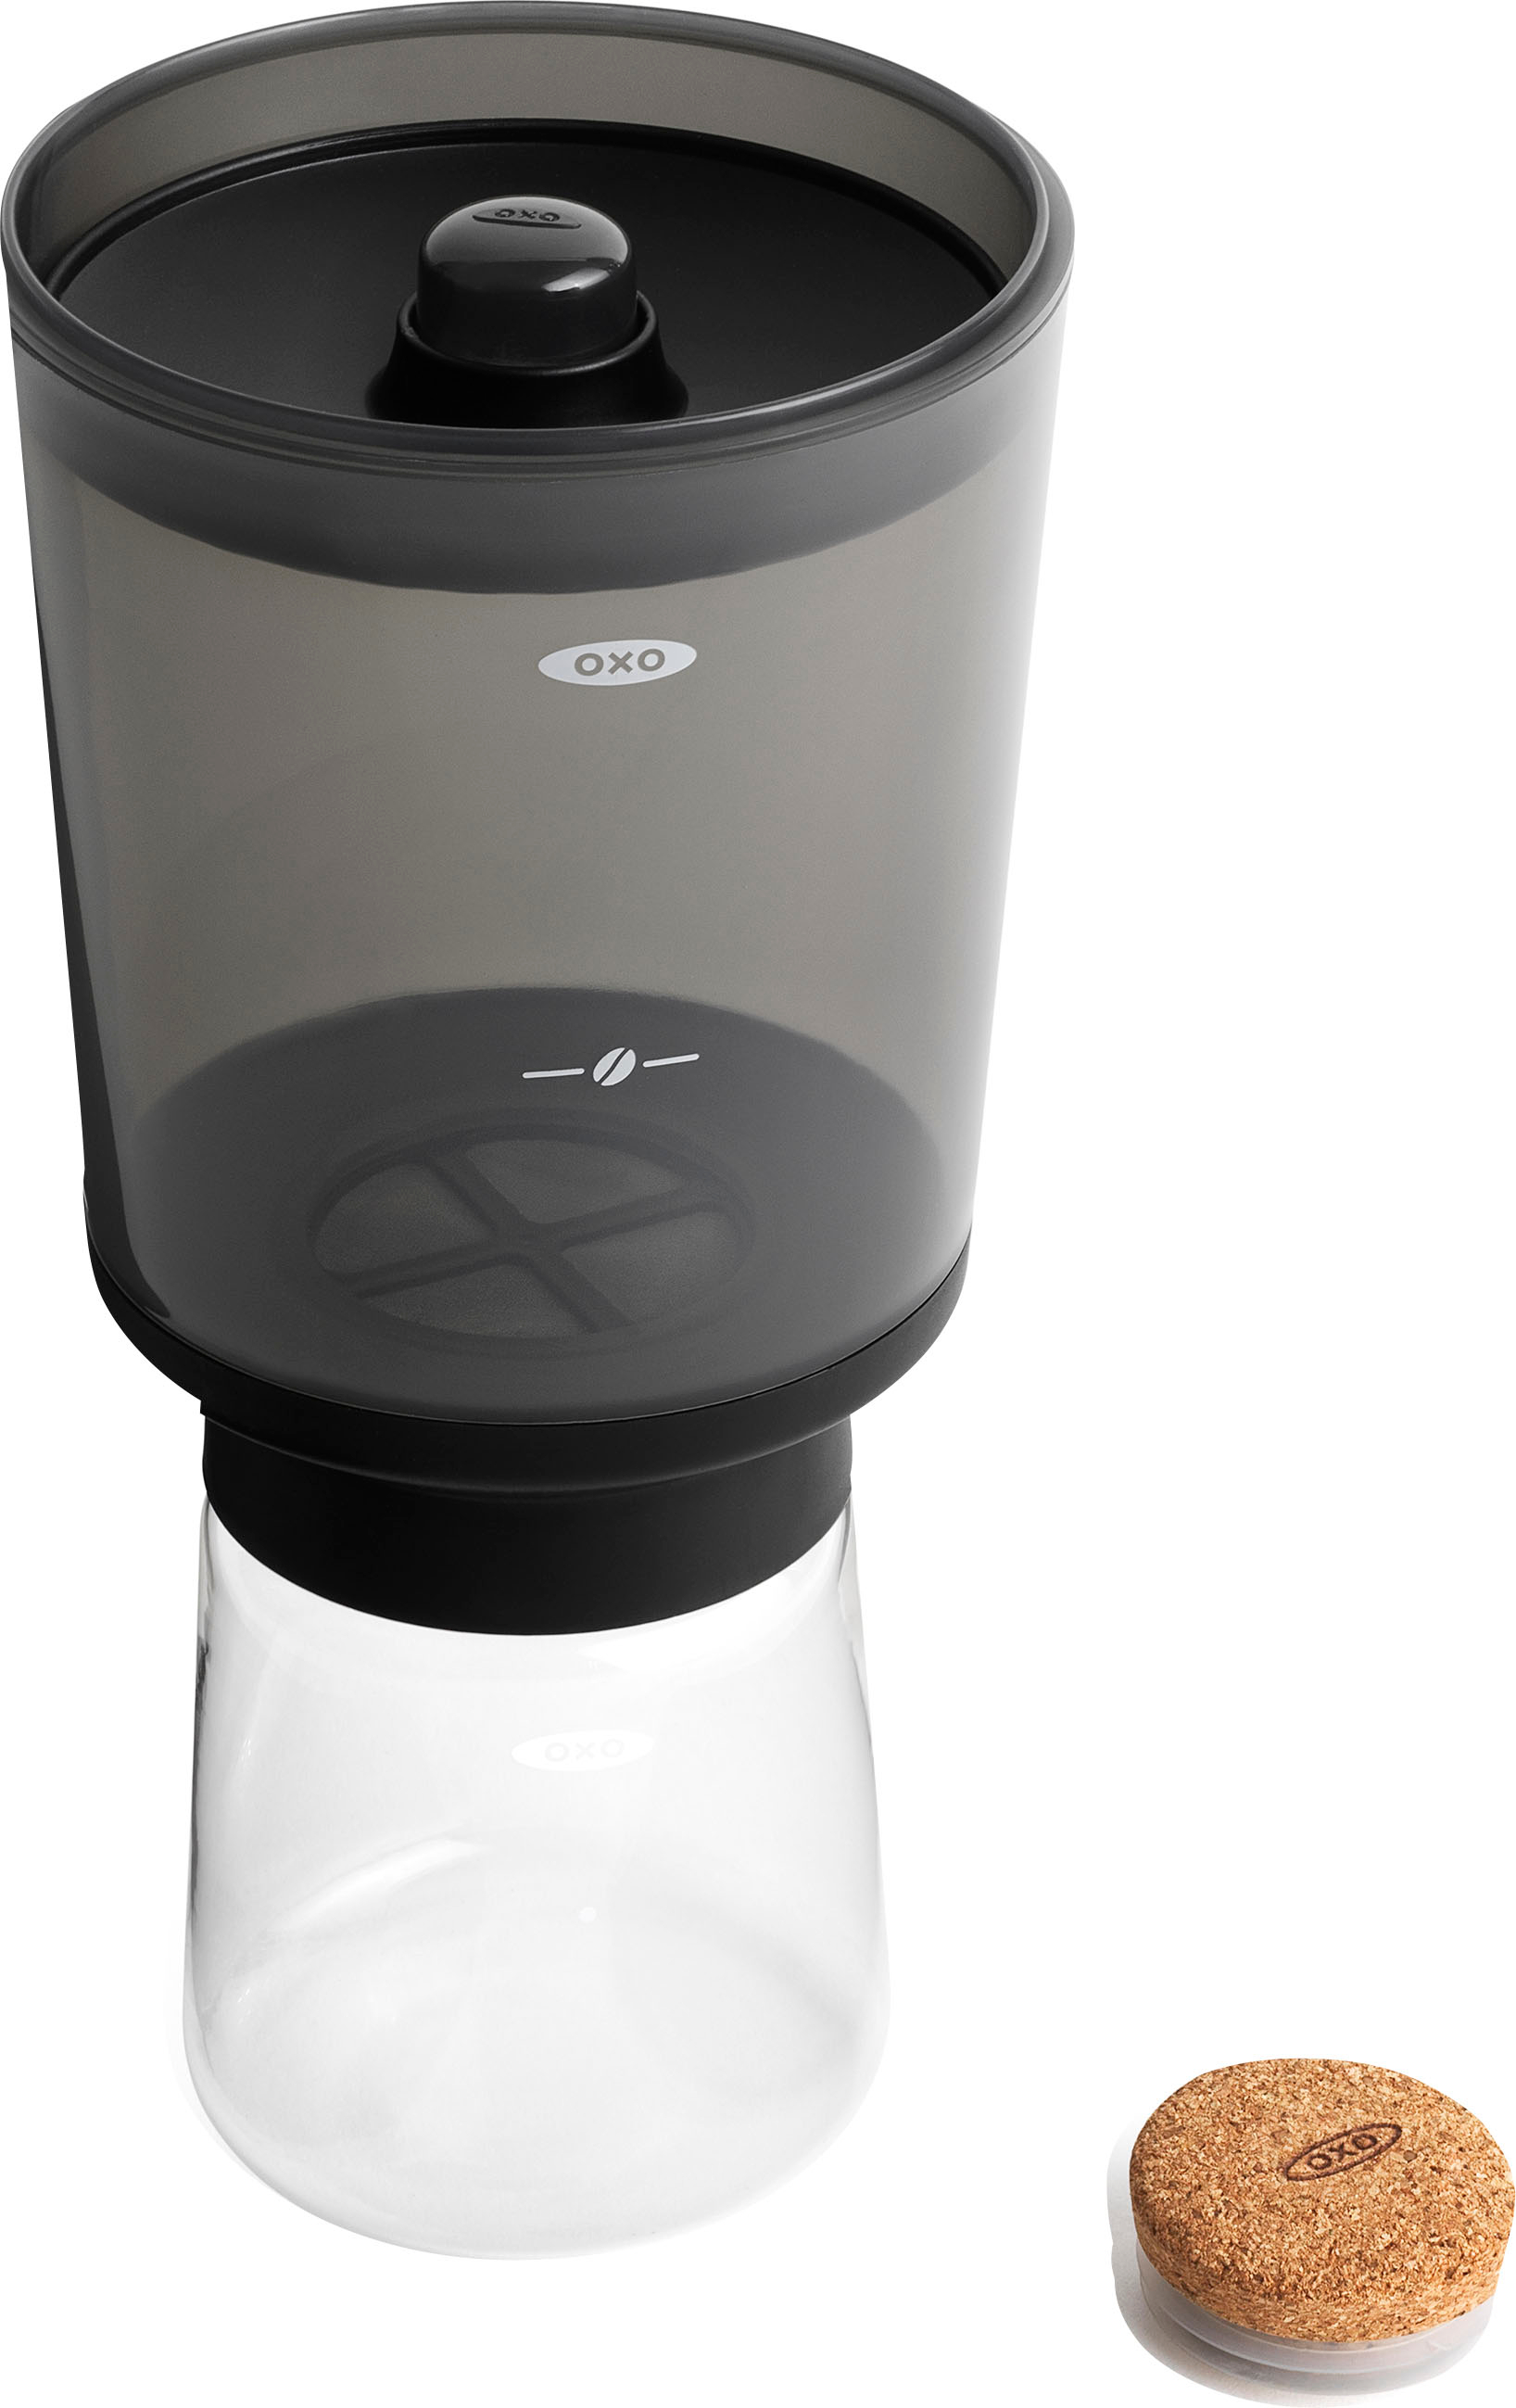 Oxo Cold Brew Compact Coffee Maker In-depth Review: A Brewer of Distinction